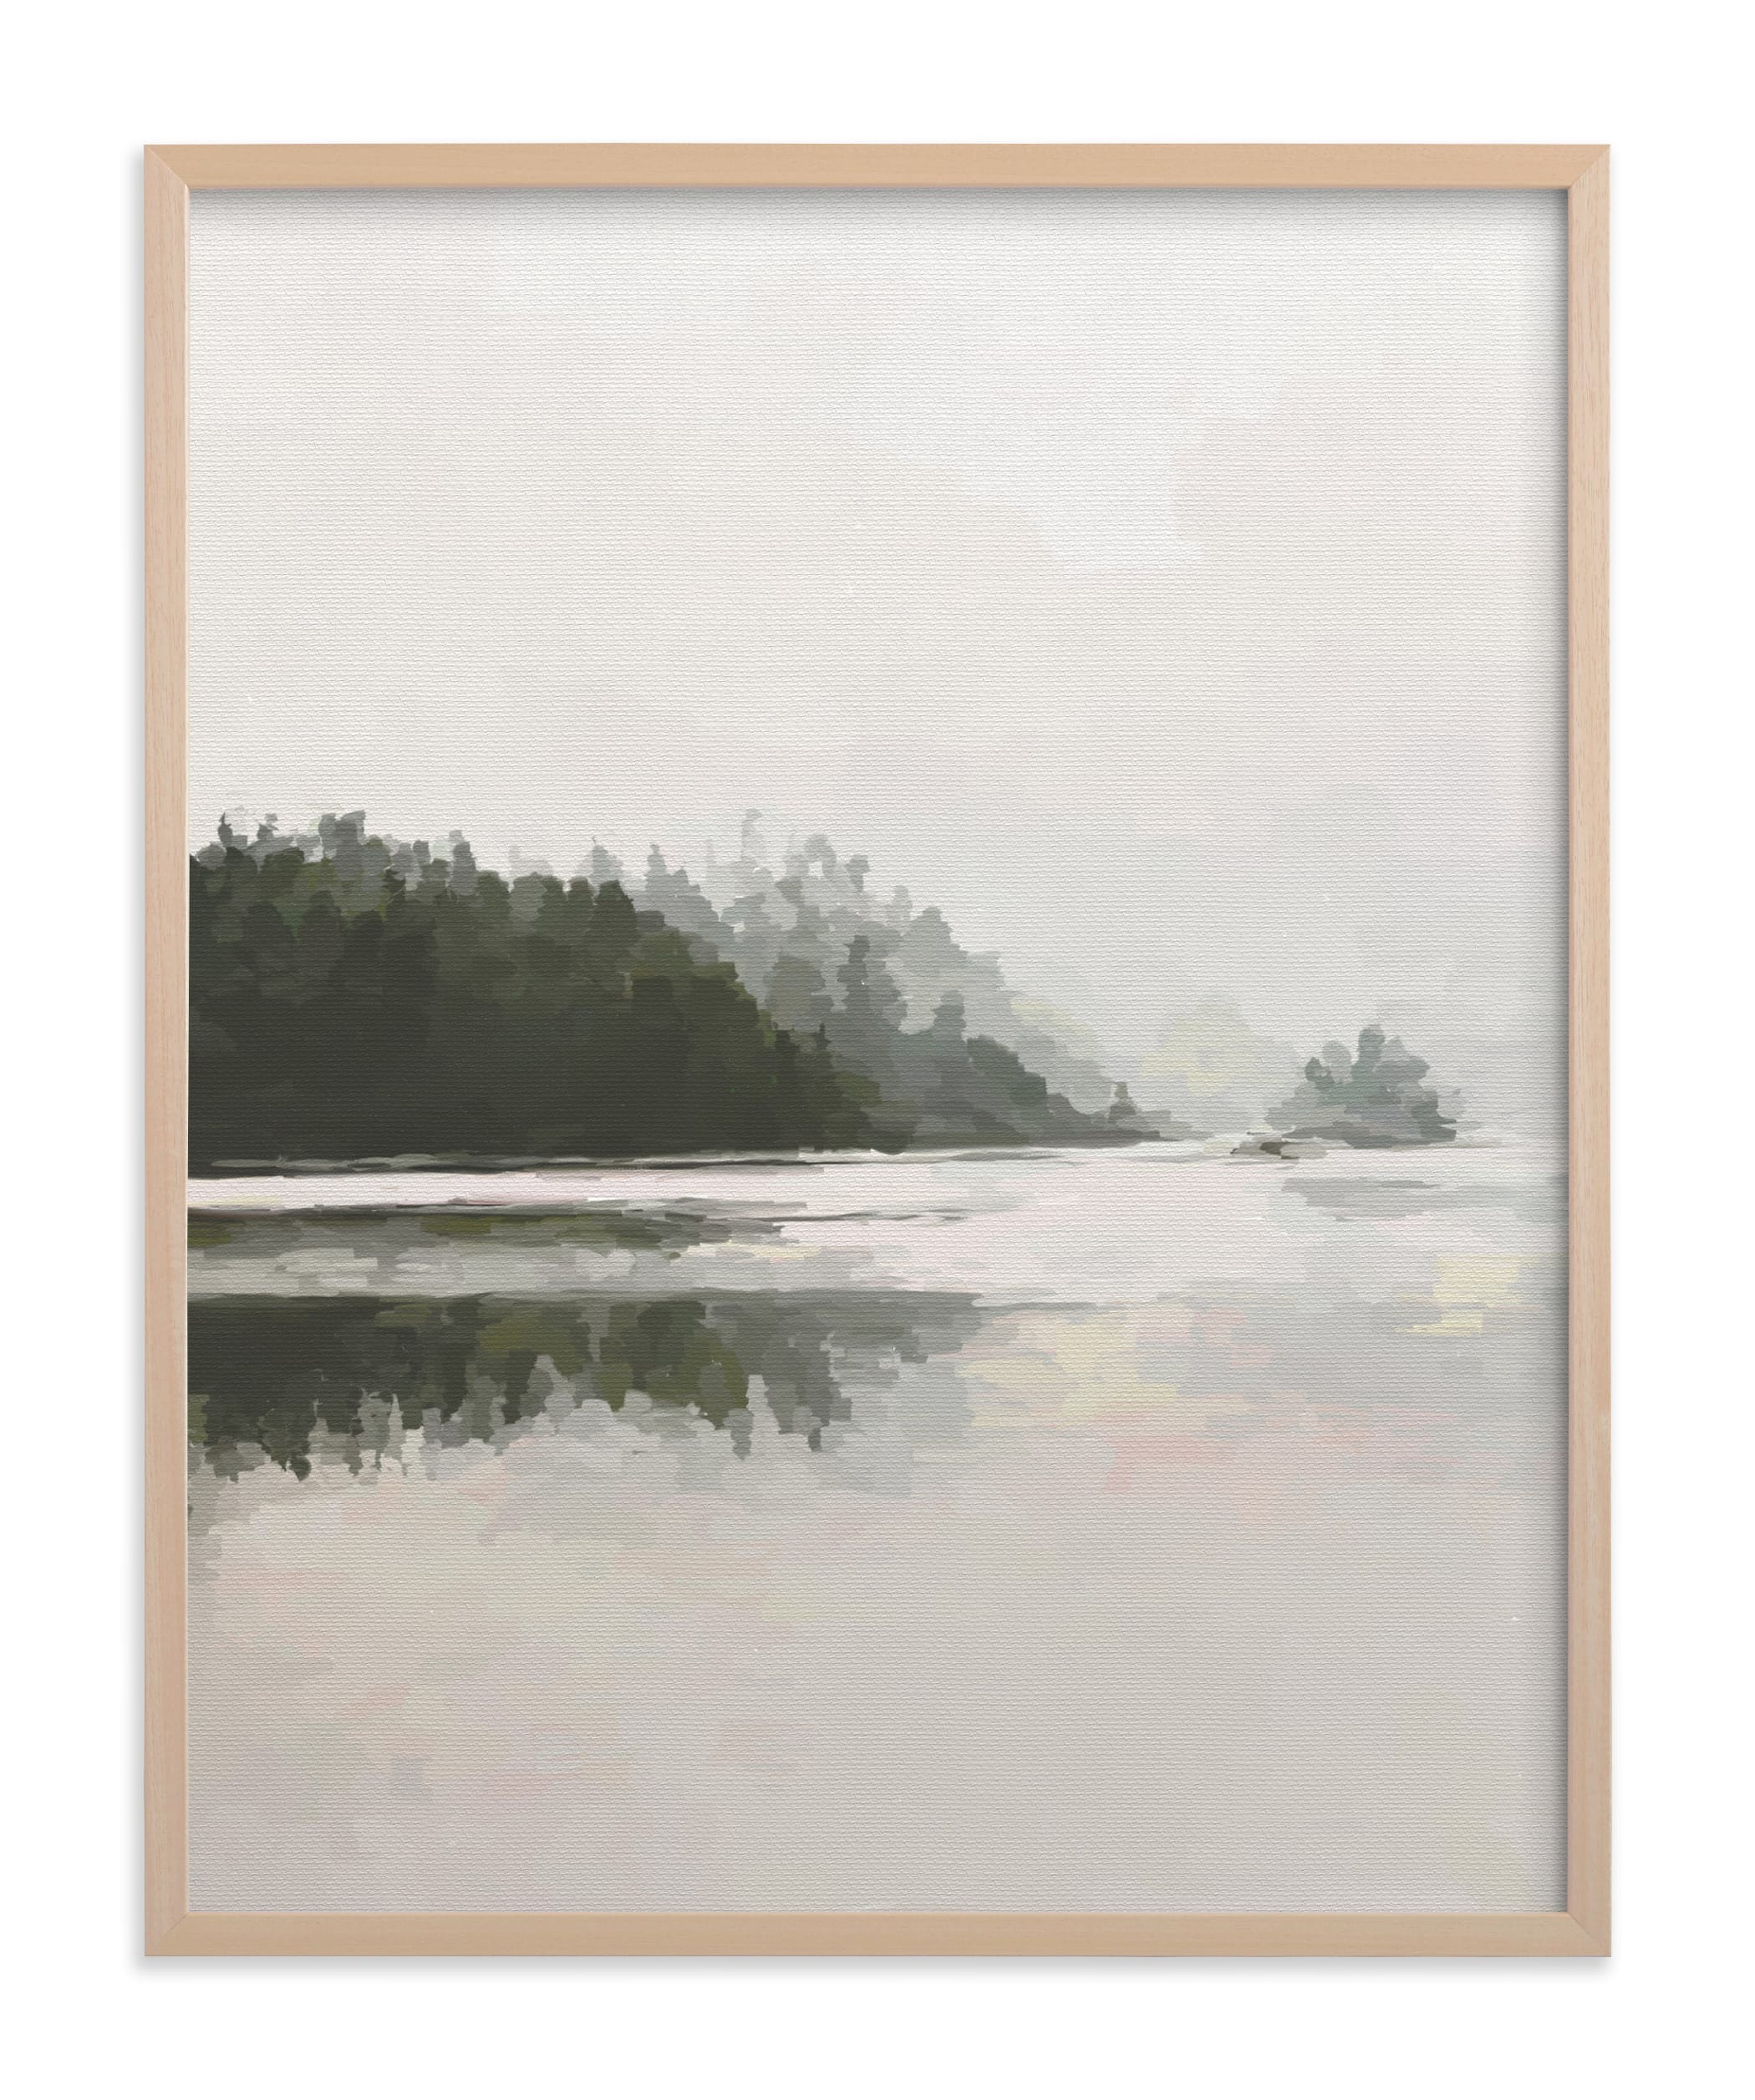 LakeView II Limited Edition Art Print 24x30 - Minted